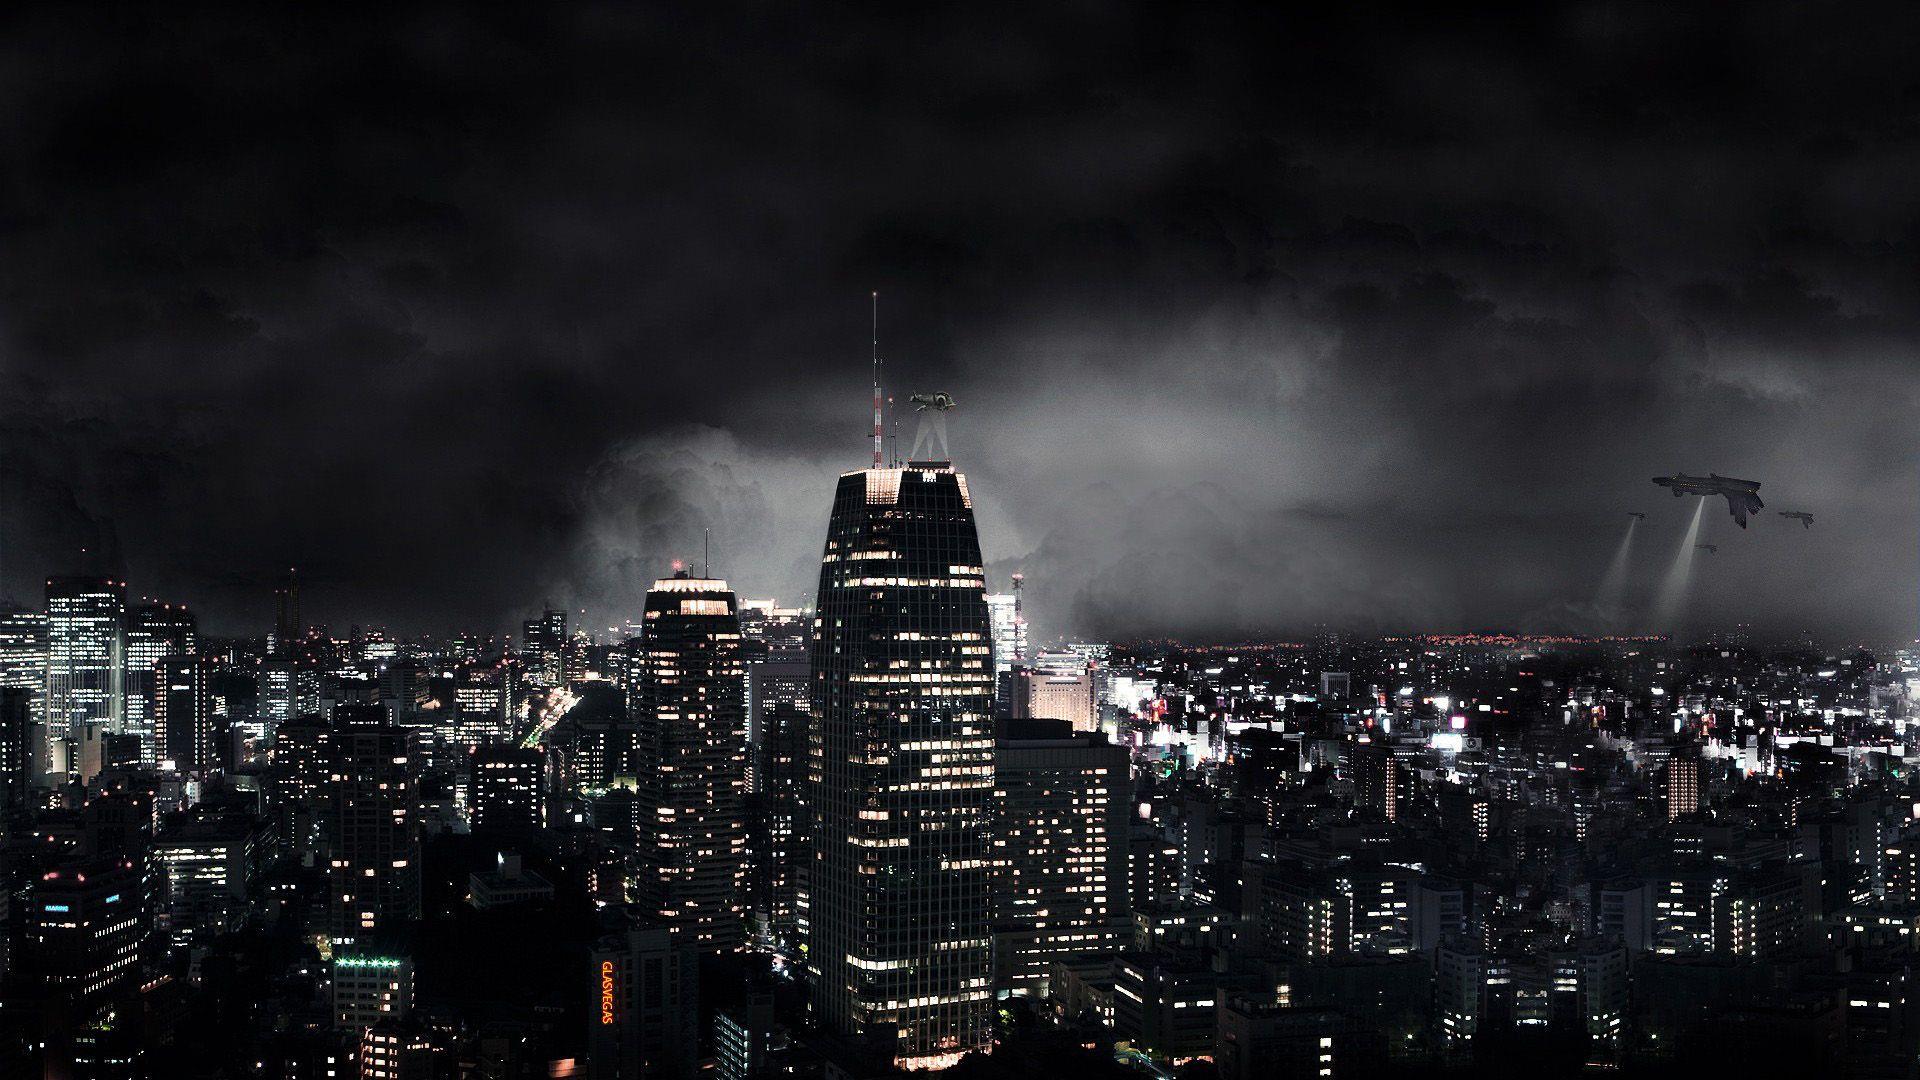 Dark Abstract City HD Wallpaper, Background Image